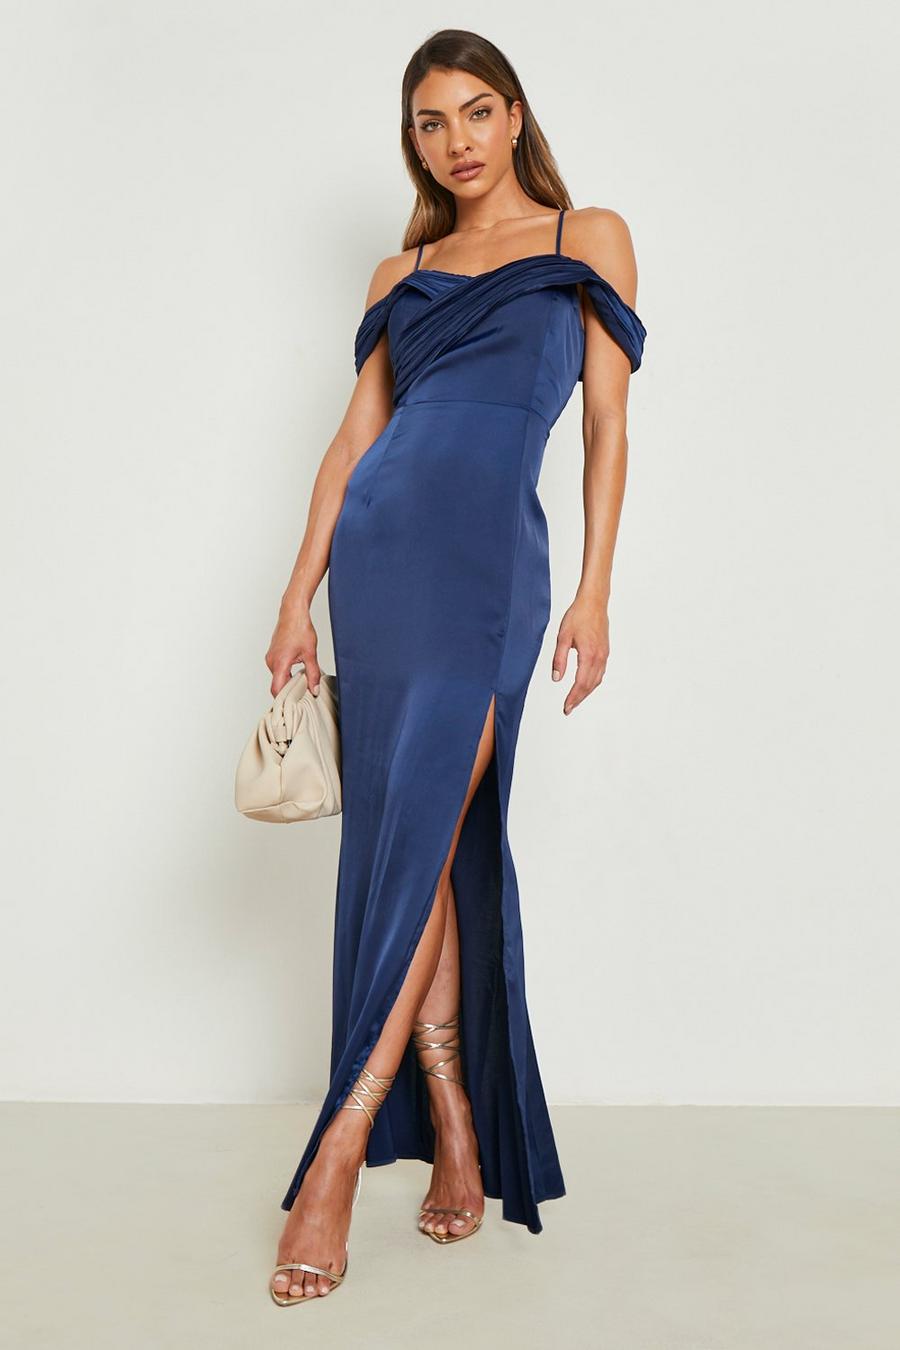 Navy Satin Off The Shoulder Strappy Maxi Dress